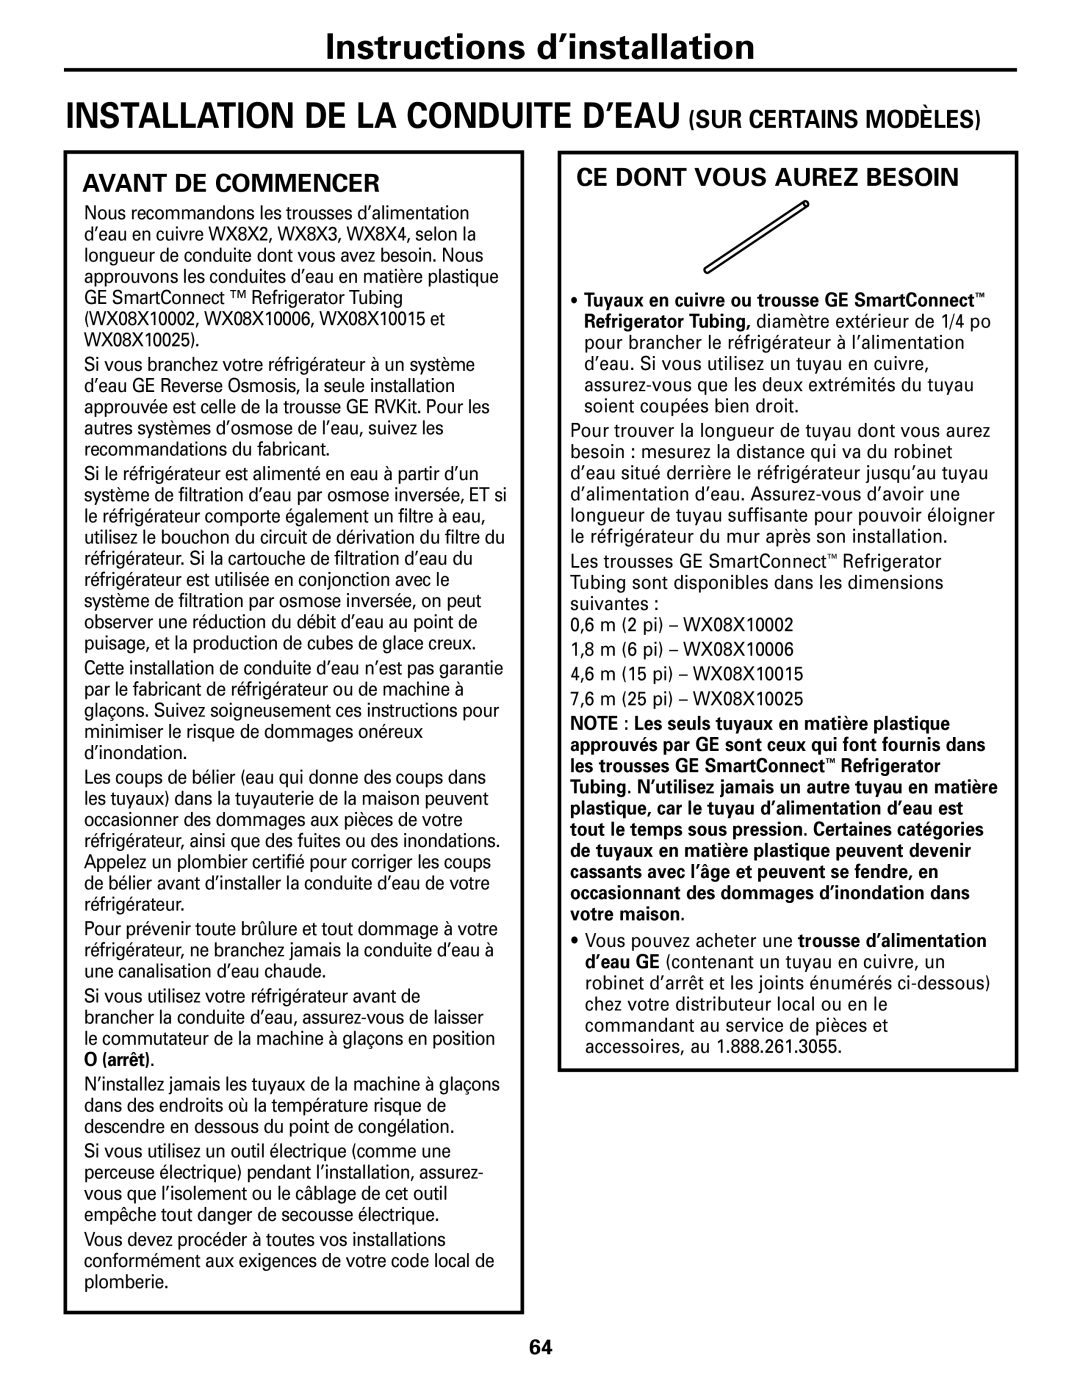 GE 22, 23, 25, 27 installation instructions Ce Dont Vous Aurez Besoin, Instructions d’installation, Avant De Commencer 